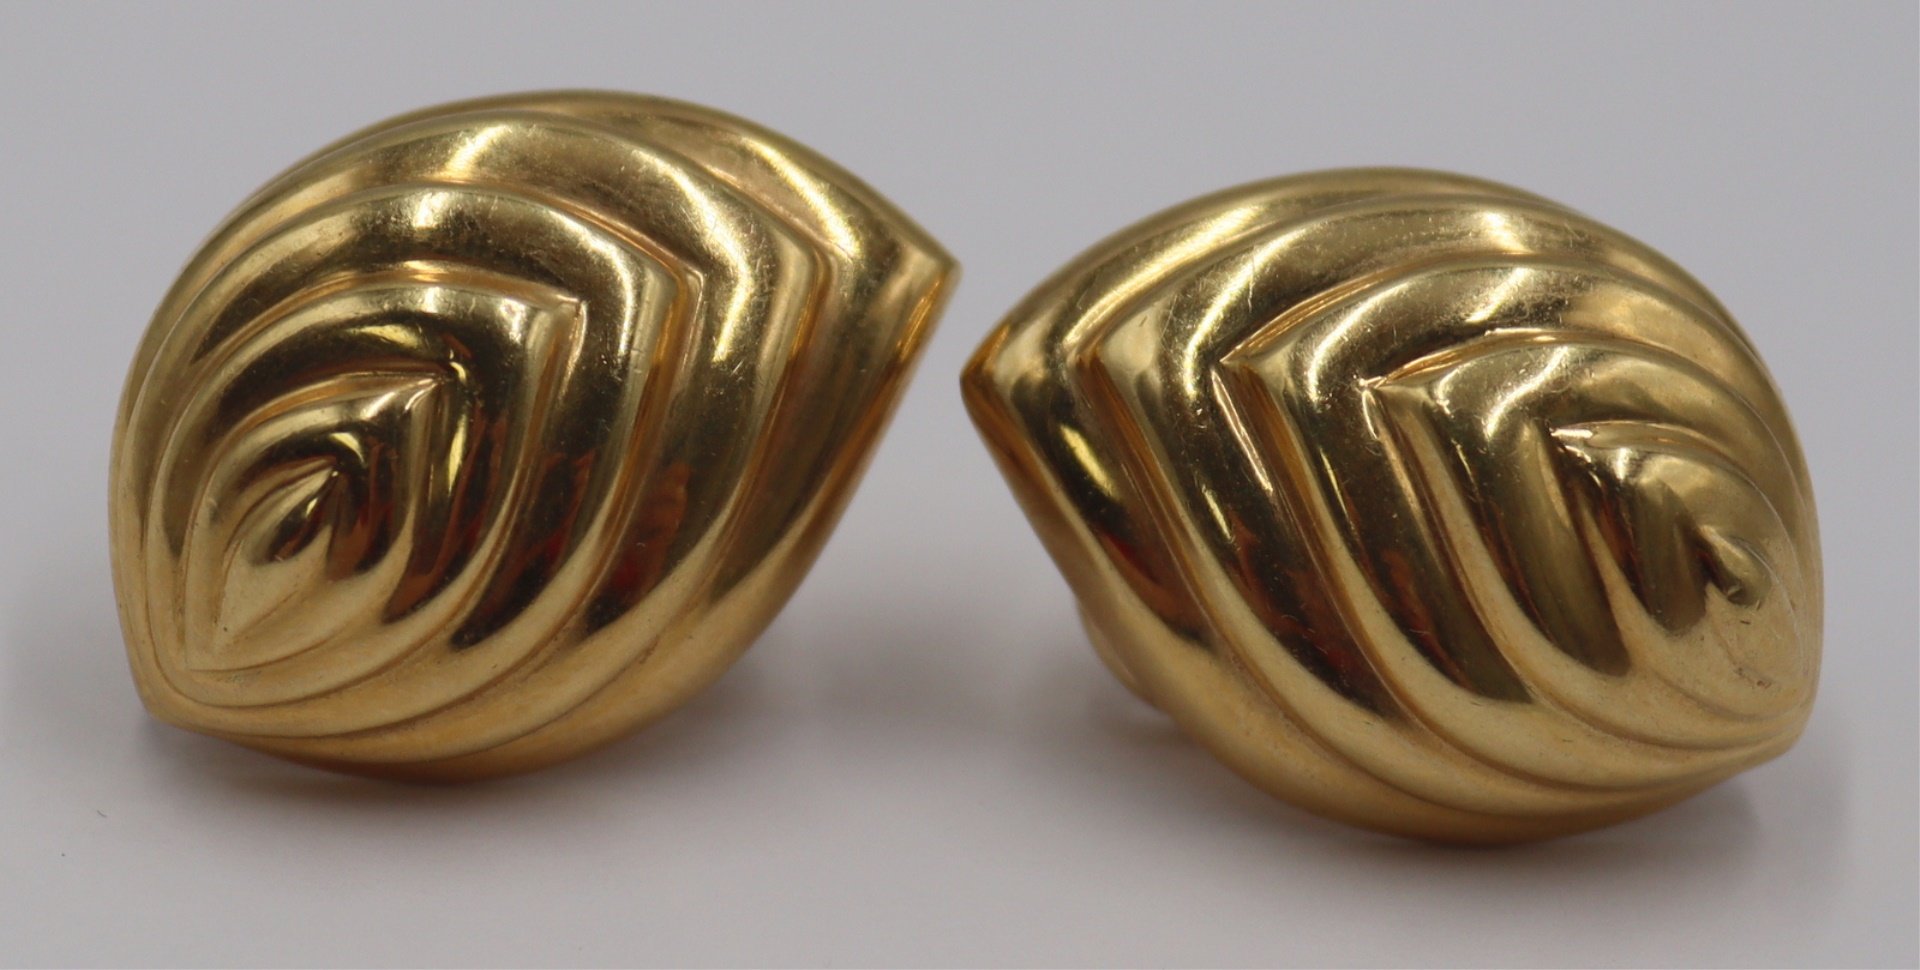 JEWELRY. PAIR OF 18KT GOLD EARRINGS.